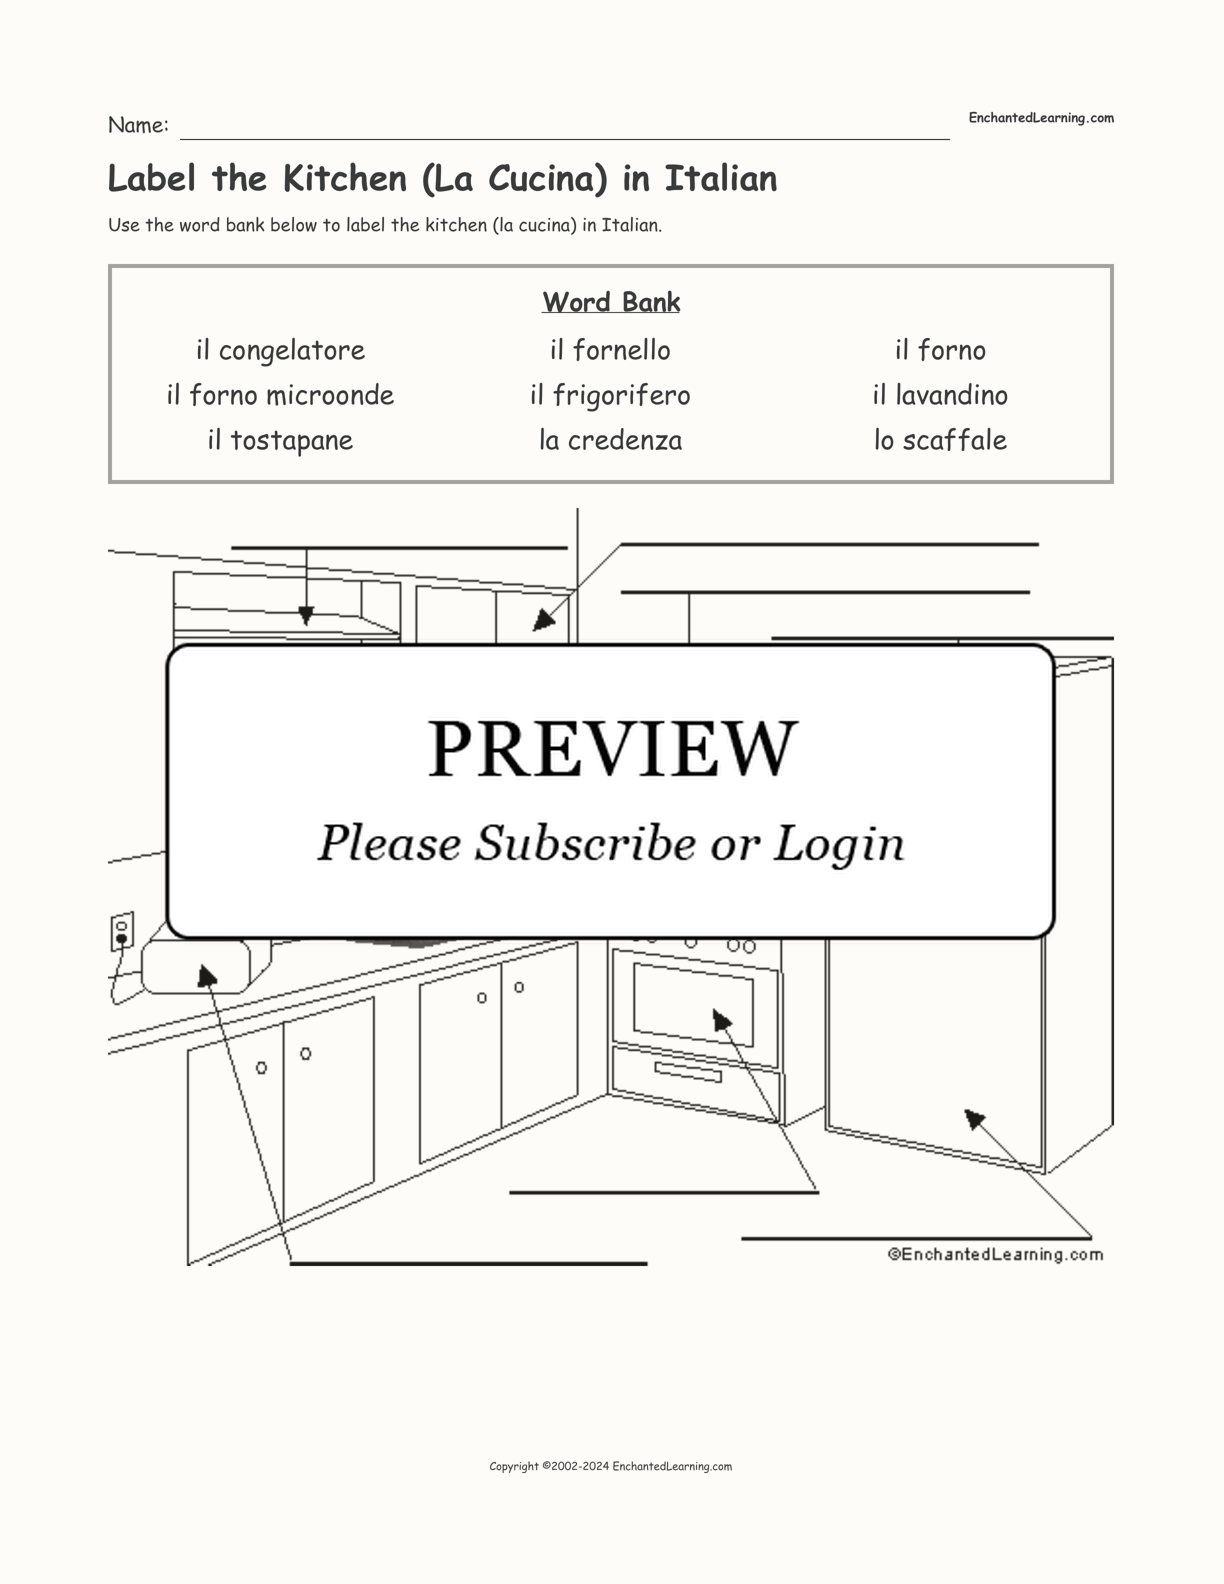 Label the Kitchen (La Cucina) in Italian interactive worksheet page 1